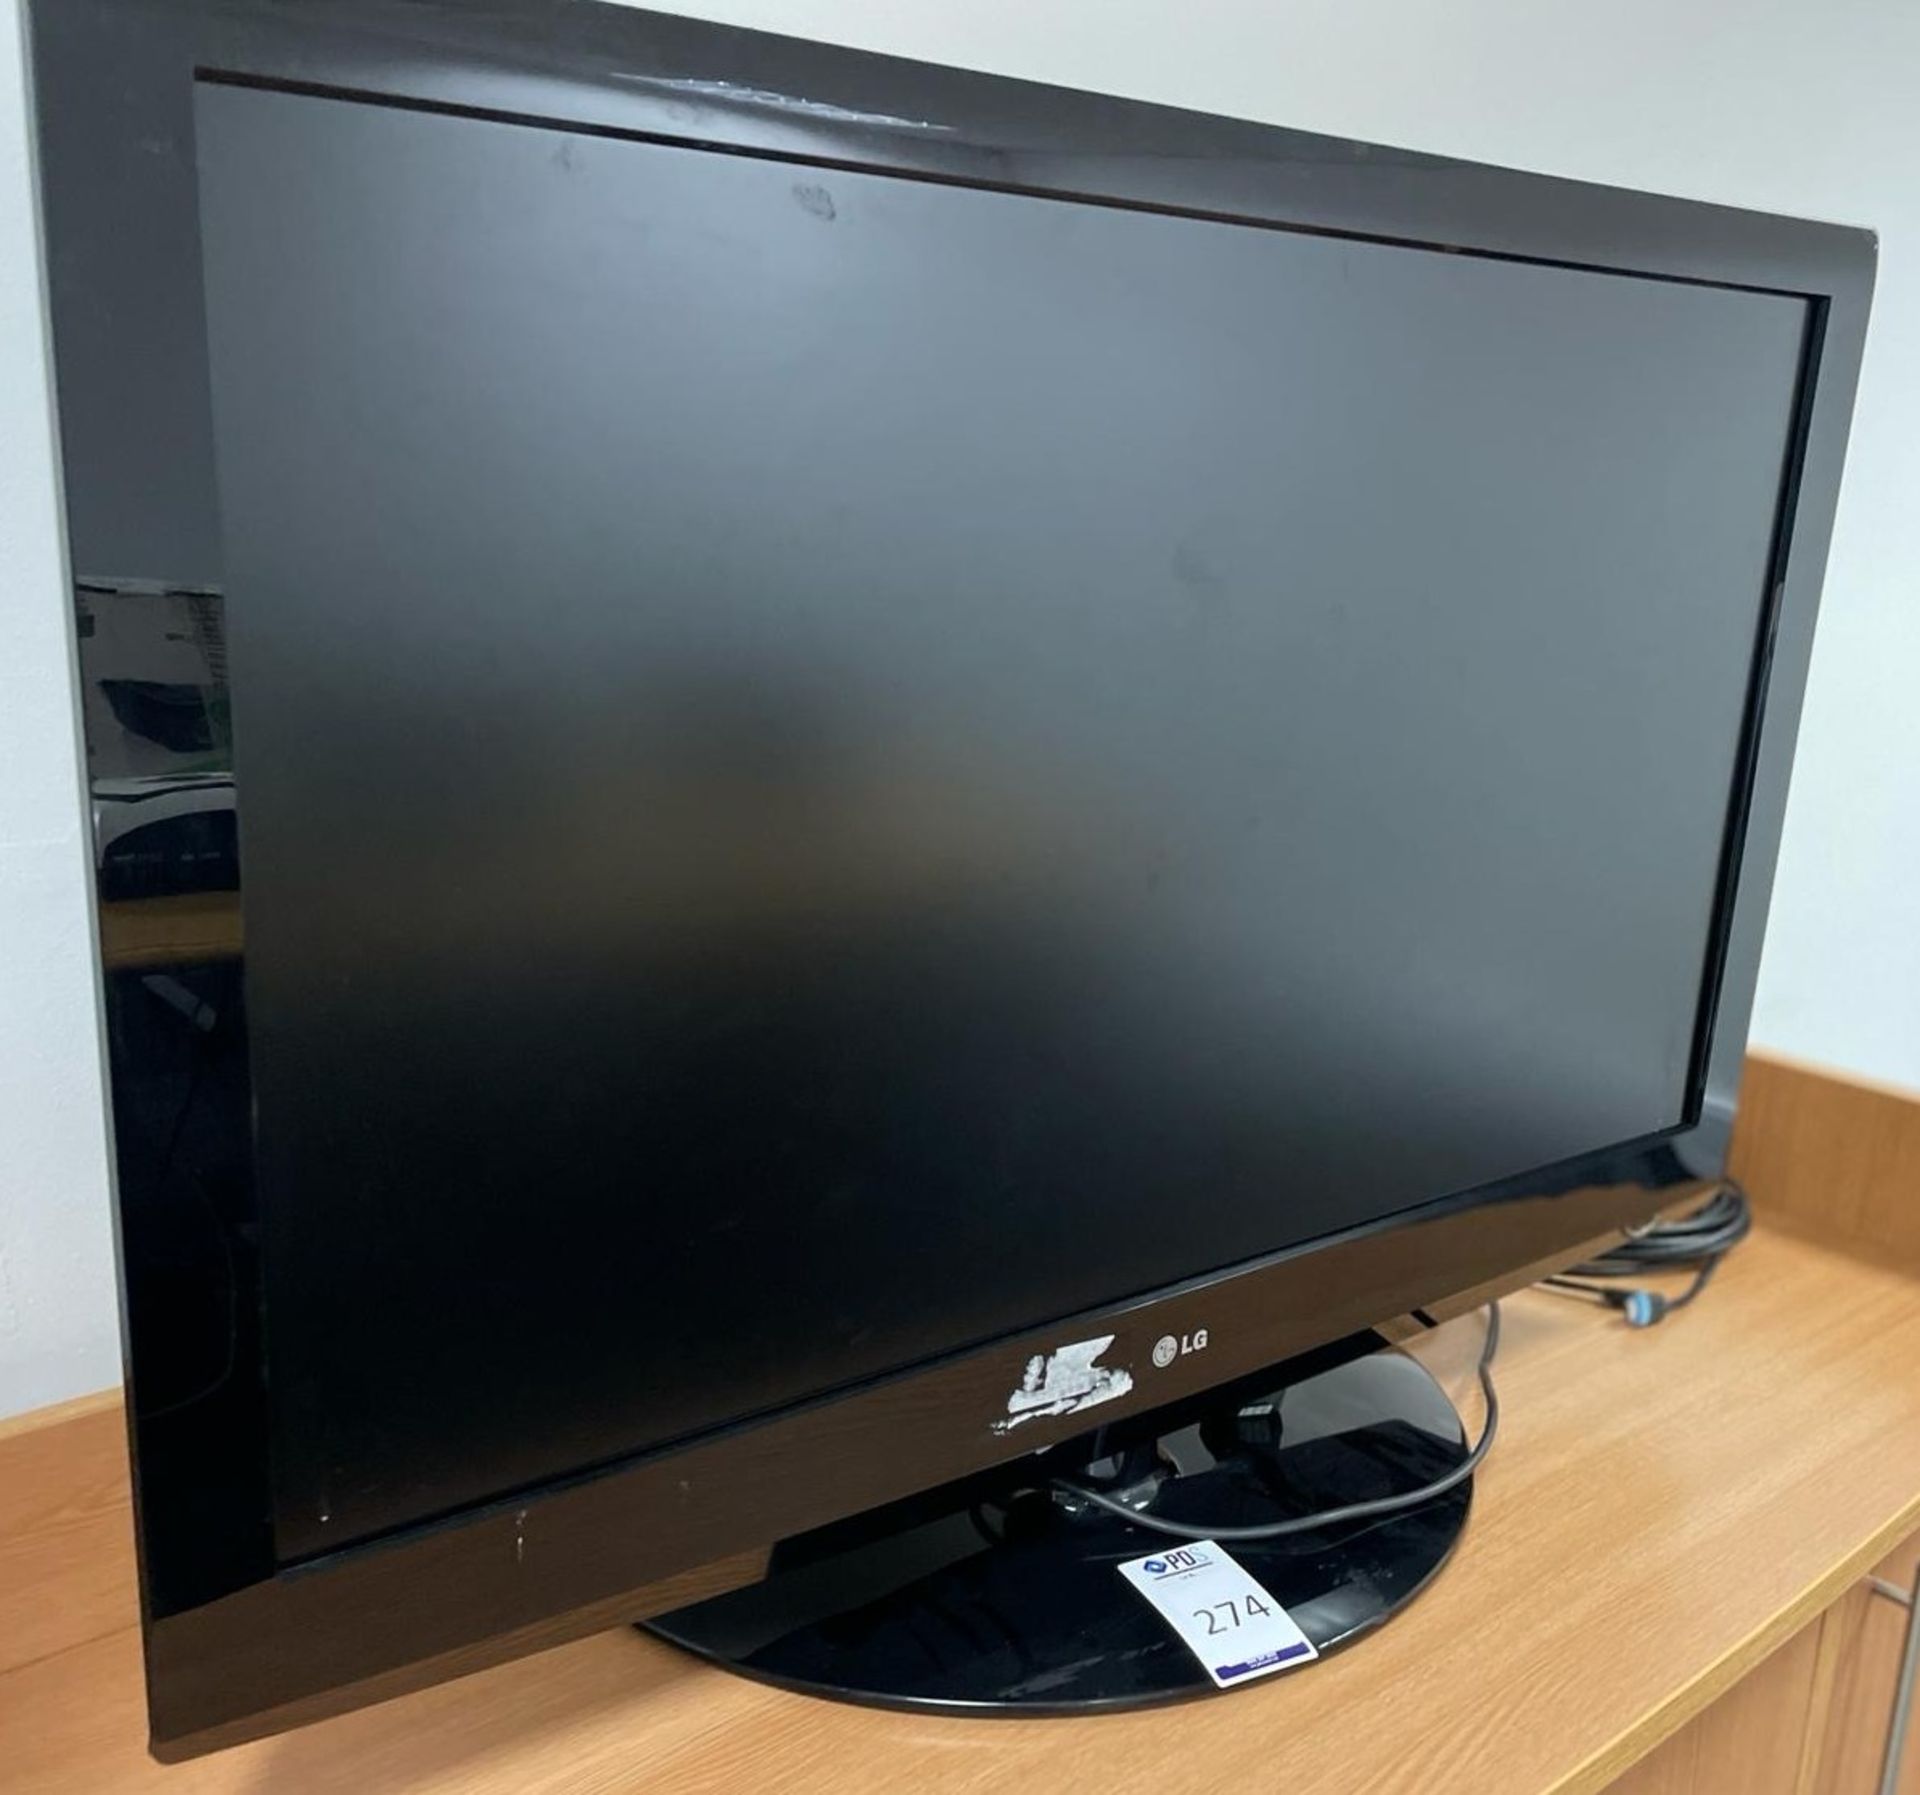 LG 42LG3000 Television (Located Rugby. Please Refer to General Notes)